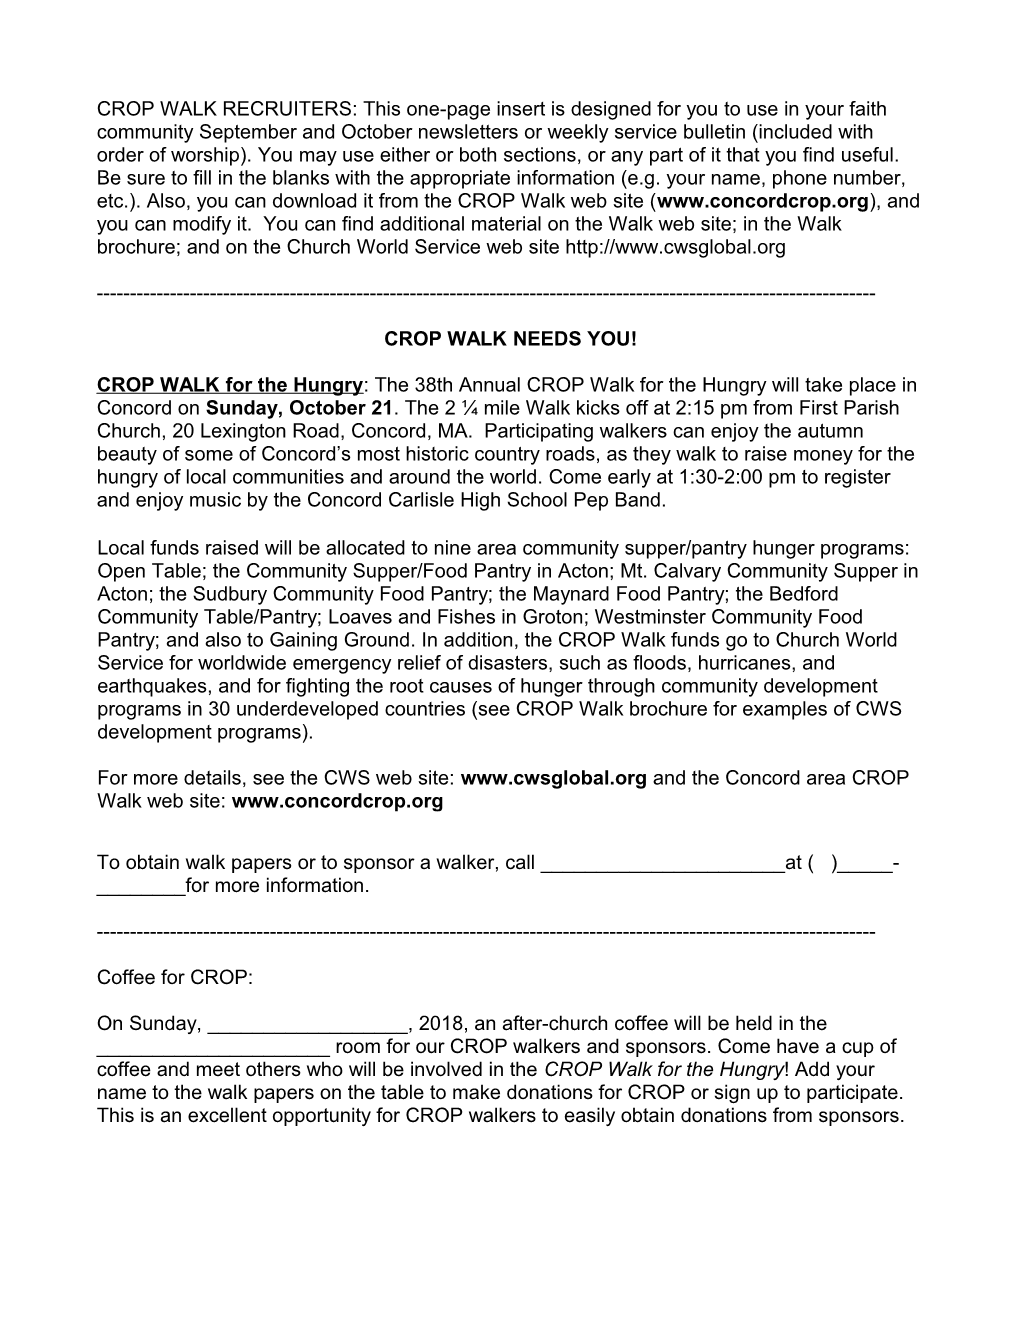 CROP WALK RECRUITERS: This One-Page Insert Is Designed for You to Use in Your Church/Synagogue